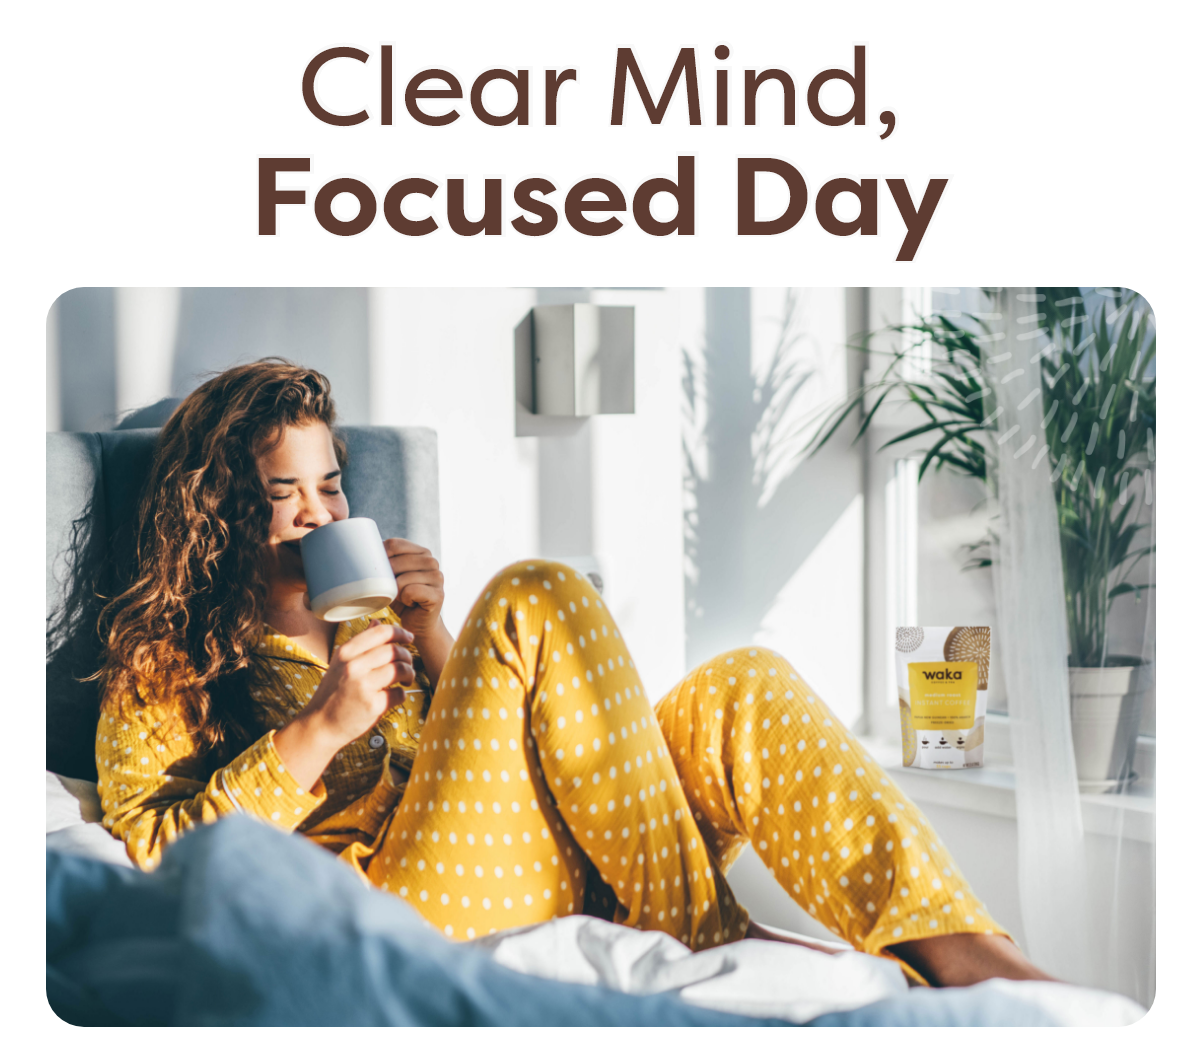 Clear Mind, Focused Day.